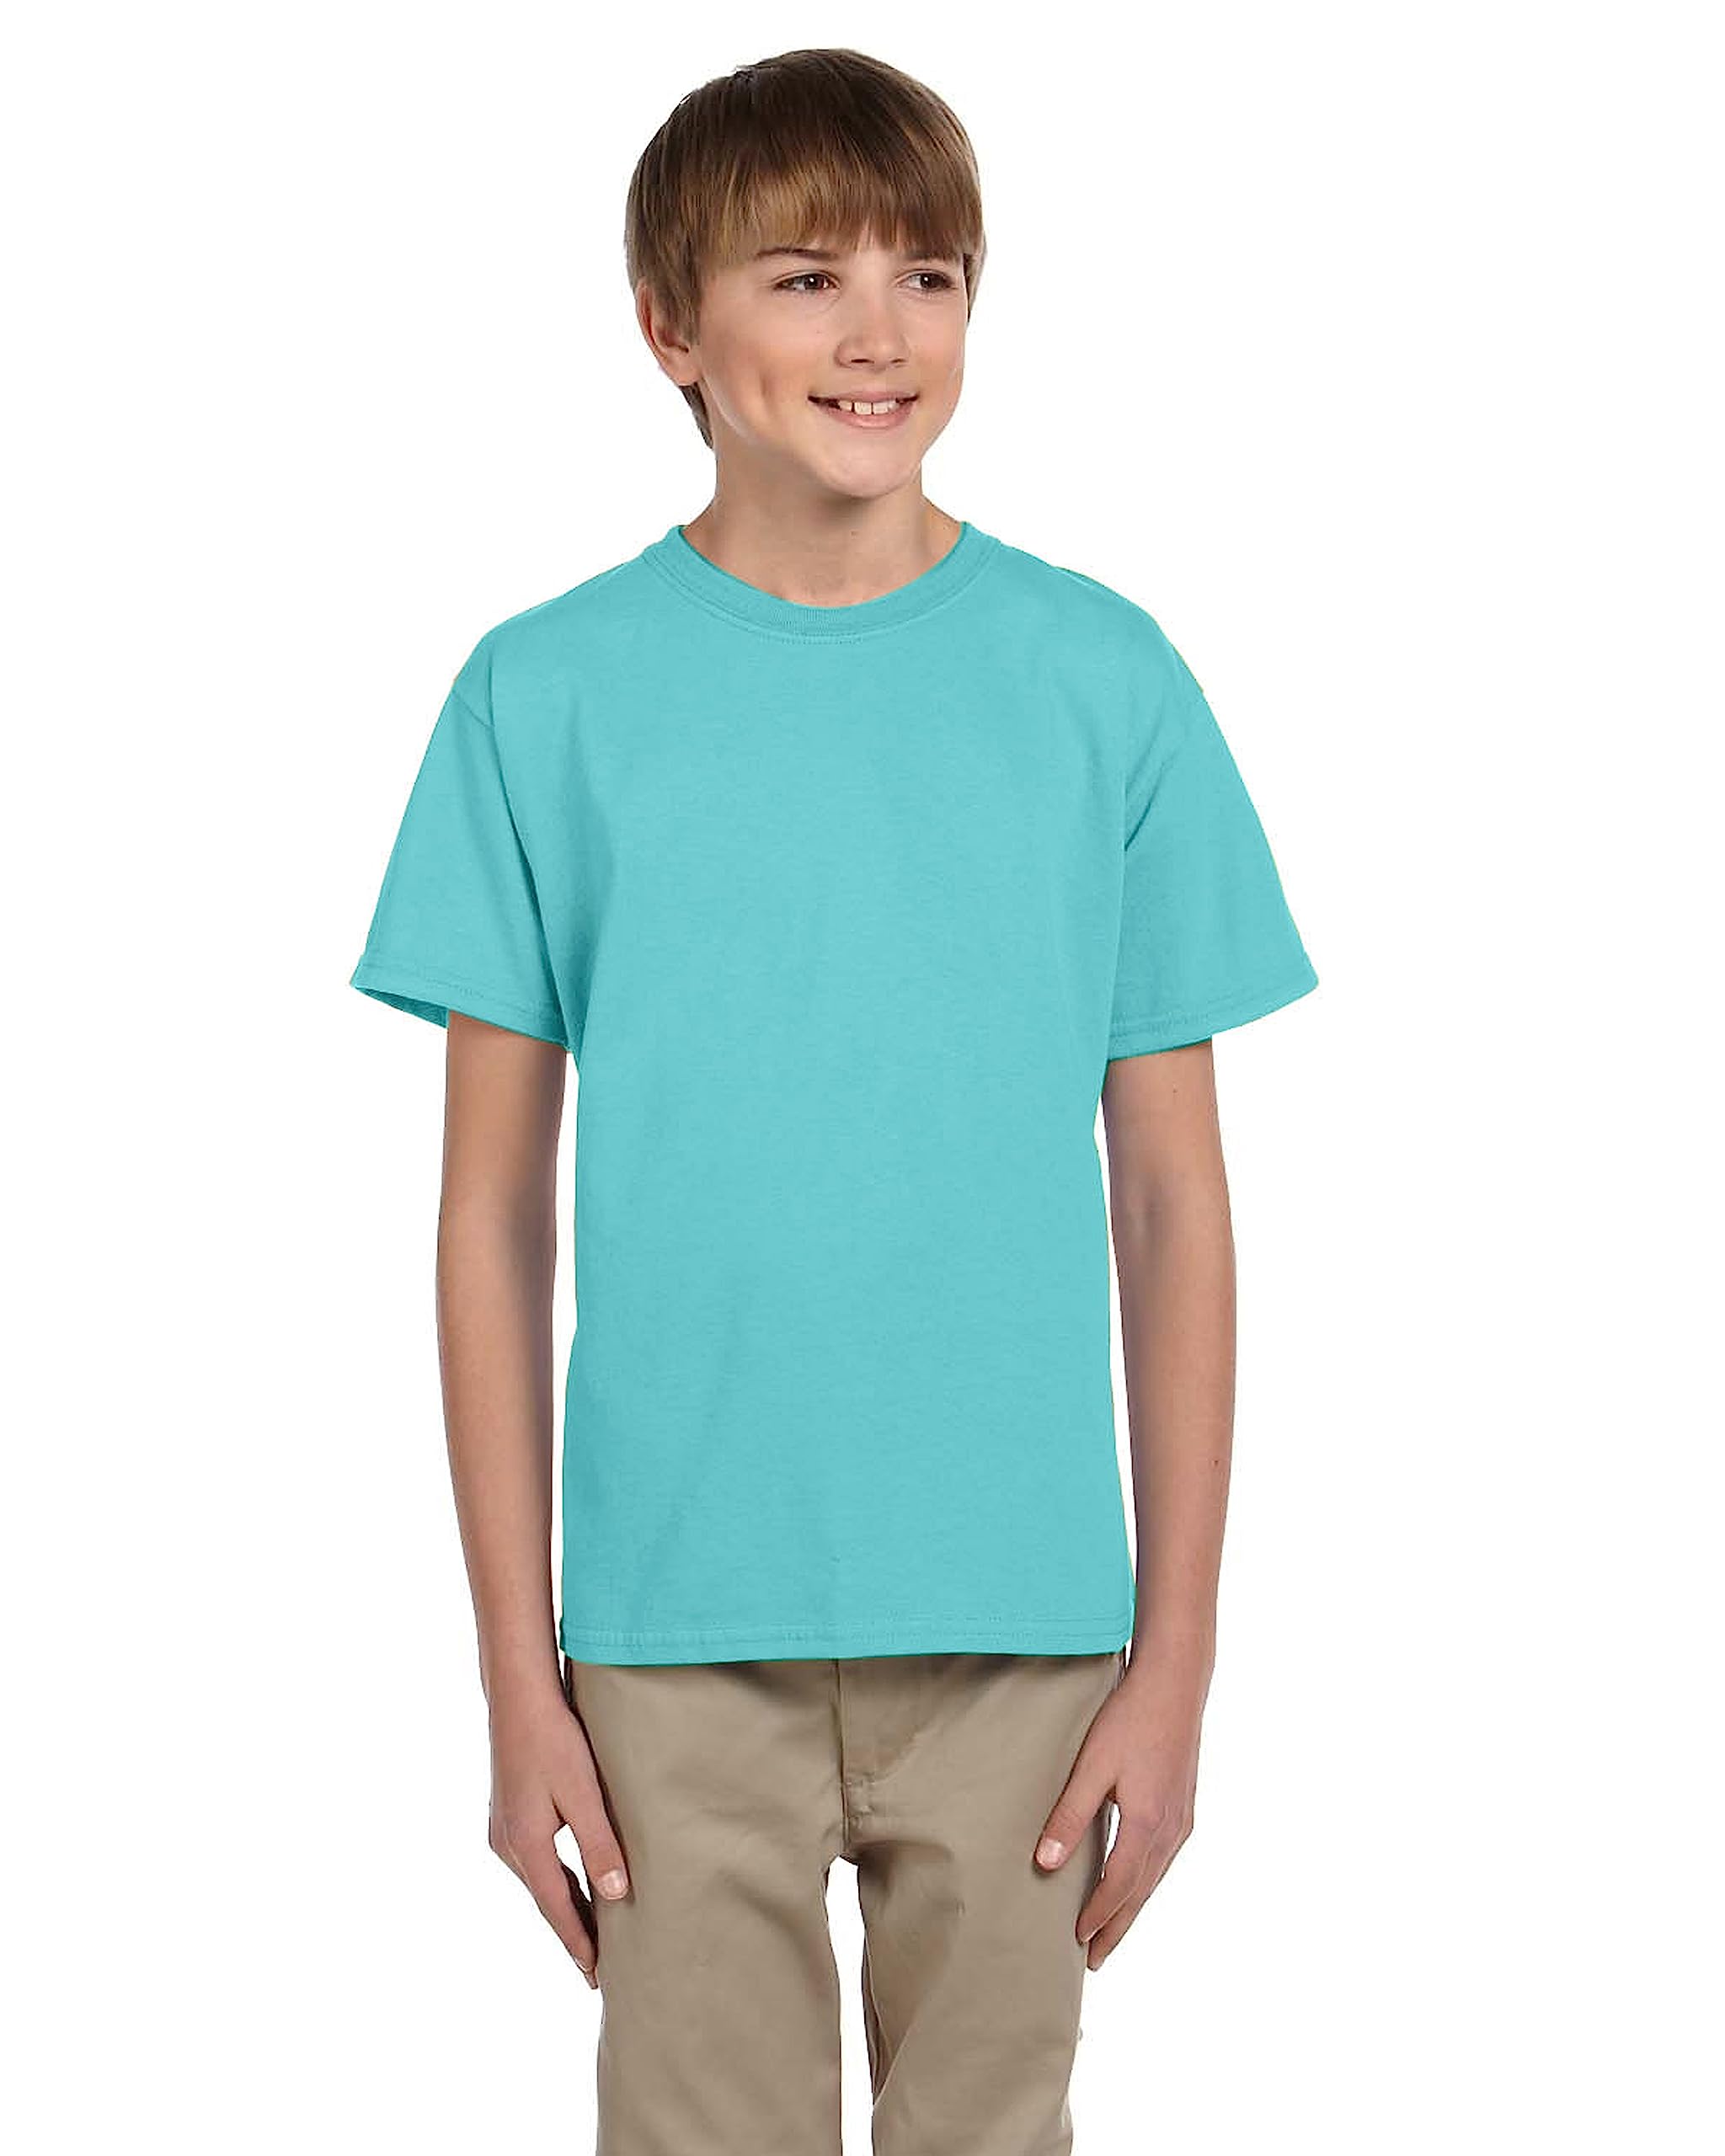 Fruit of the Loom - HD Cotton Youth Short Sleeve T-Shirt - 3930BR